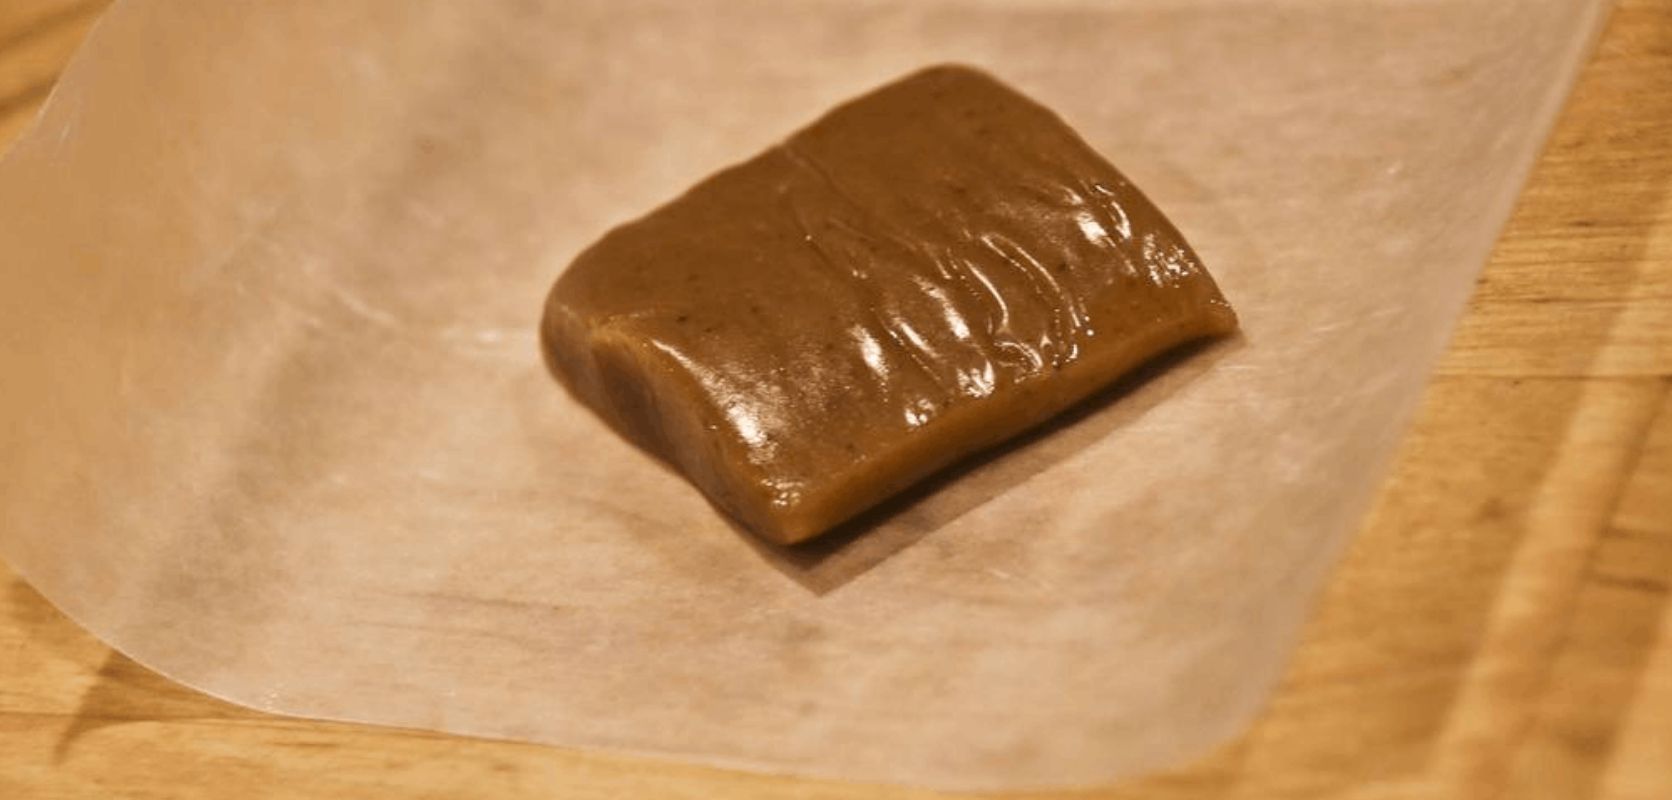 When it comes to dosing with THC caramels, it's essential to be mindful of how much you're consuming. 